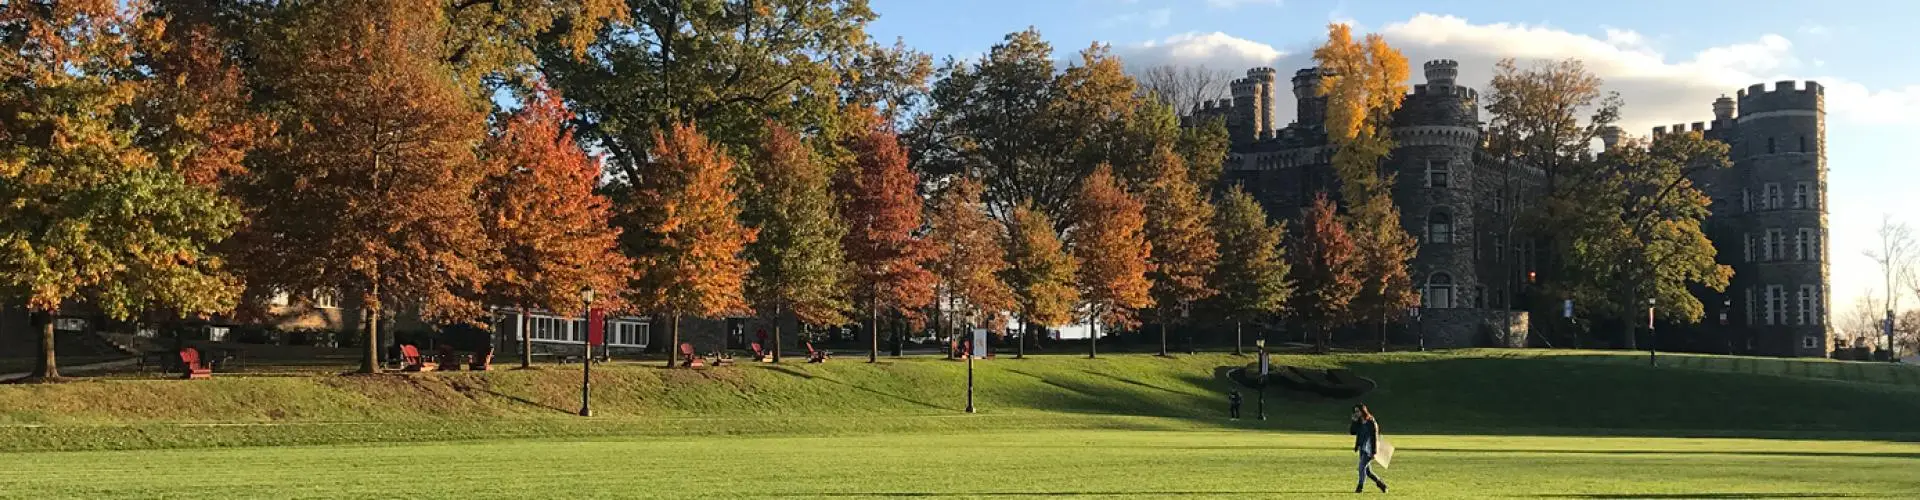 A person walking on Haber Green with the trees in the background